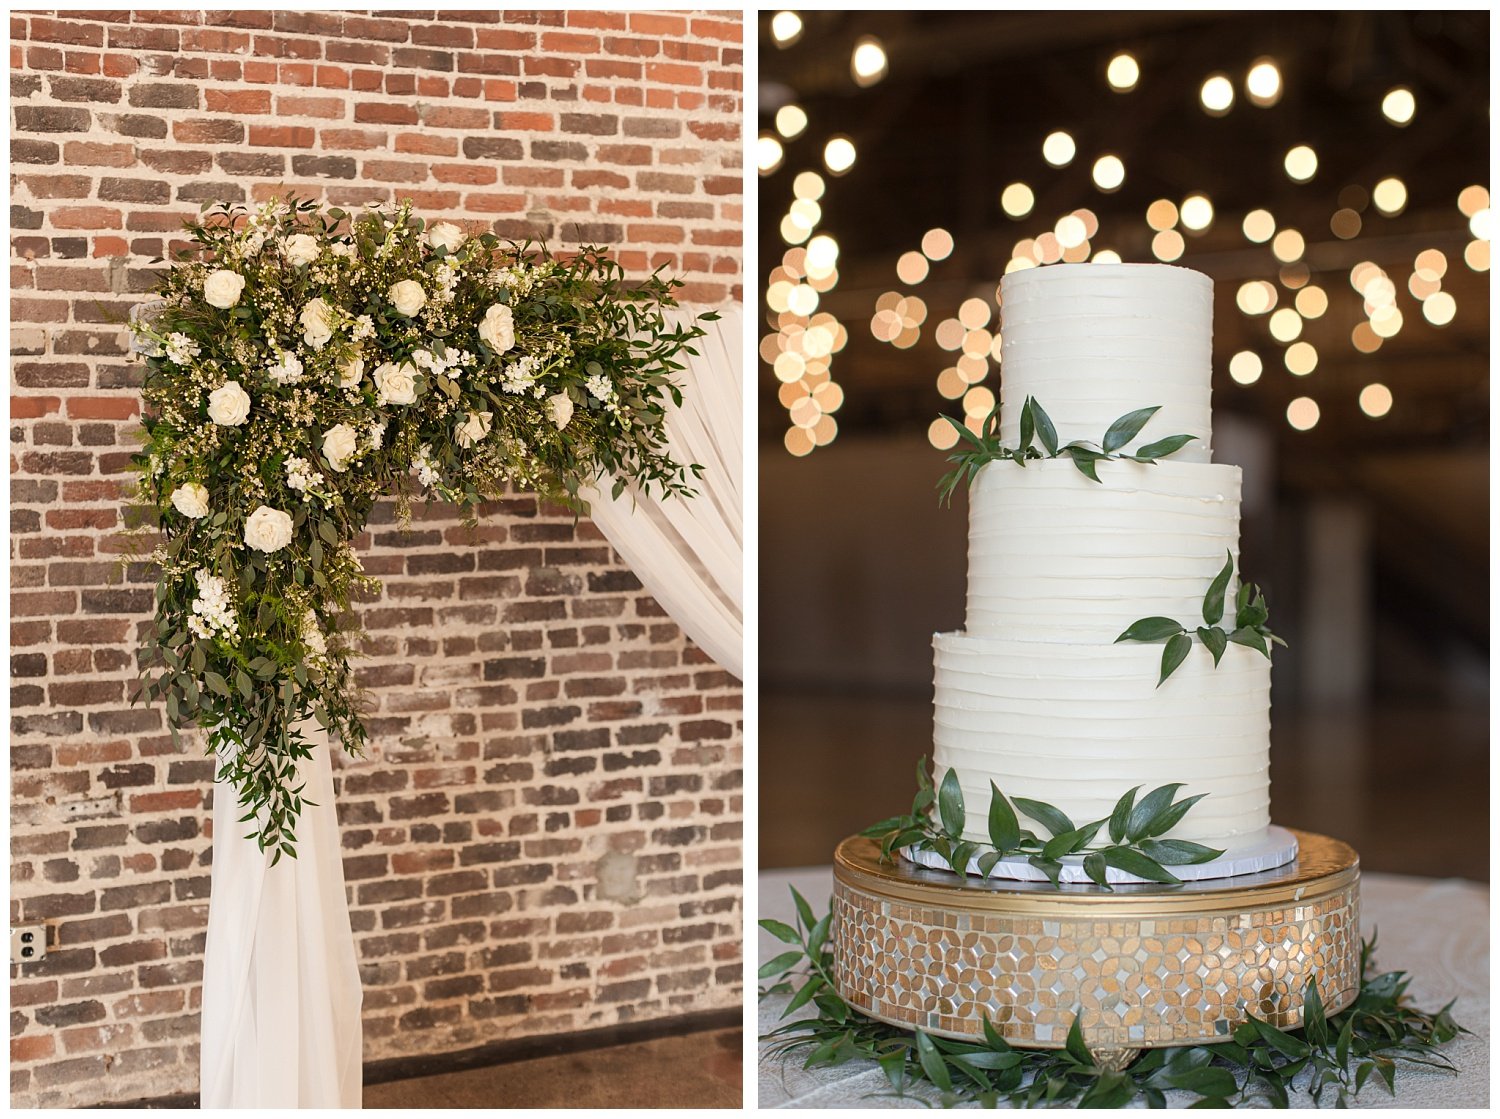 details of ceremony and cake at wedding in Knoxville